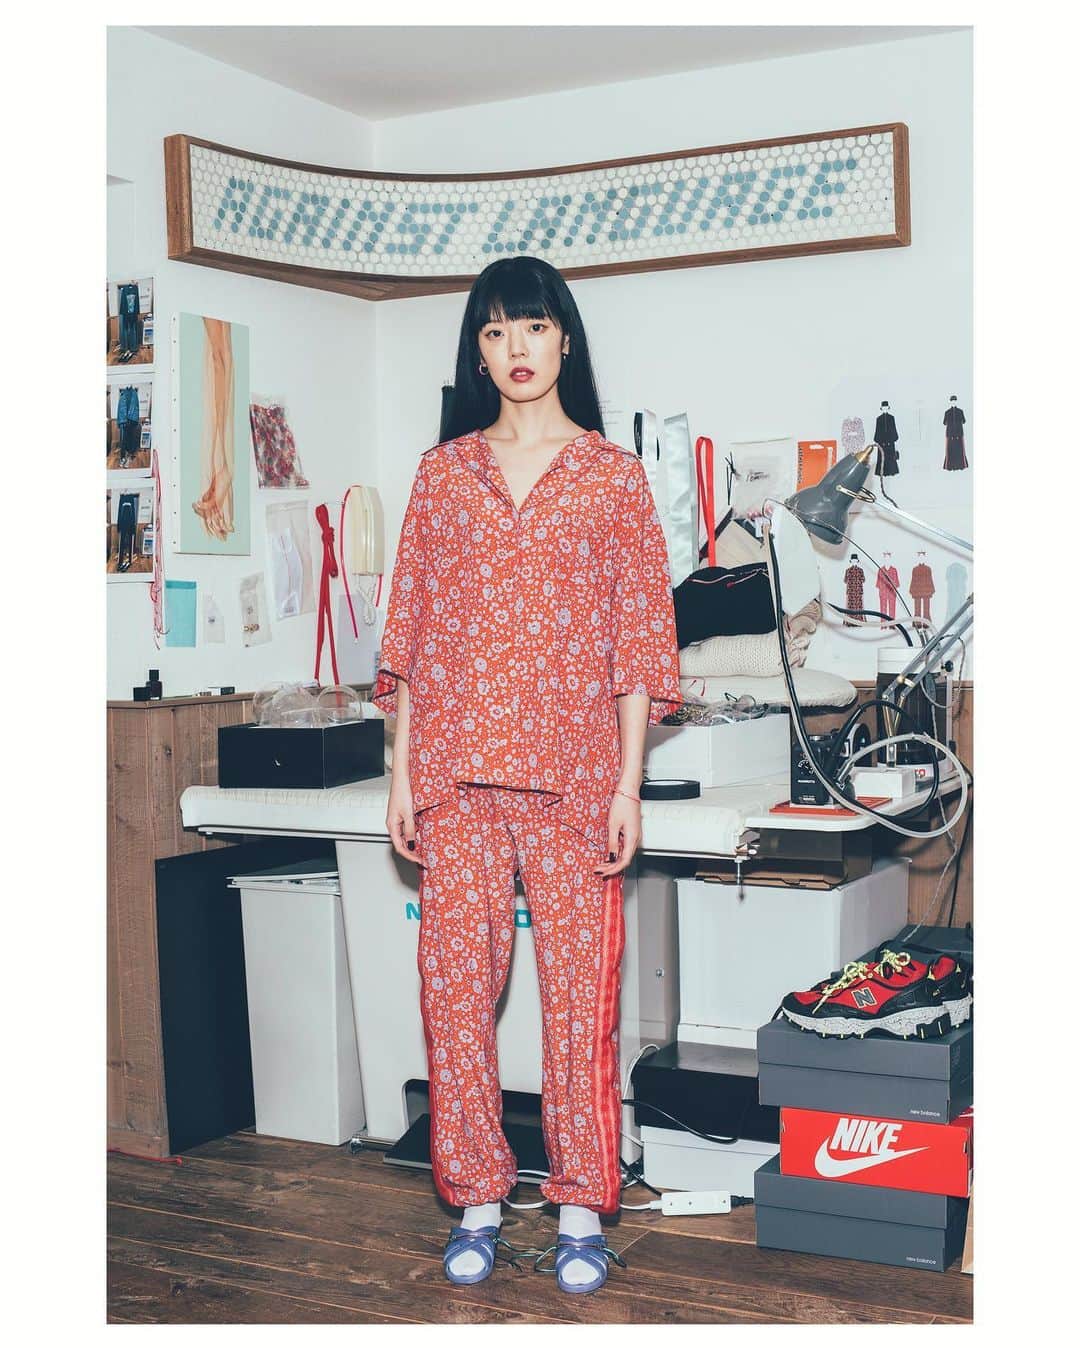 NEONSIGNのインスタグラム：「…2021 SPRING SUMMER COLLECTION﻿ ﻿ “MMMMMMWMMM”﻿ ﻿ Whenever you find that you are on the side of the Majority, it is to reform.﻿ ﻿ …﻿ ﻿ Directed by﻿ ﻿ Photographer：TARO MIZUTANI﻿ Stylist：LAMBDA TAKAHASHI﻿ Hair & Make-up：MASANORI KOBAYASHI﻿ ﻿ Model：FUKA  ... #NEONSIGN #ASUKAHAYASHI #MMMMMMWMMM」